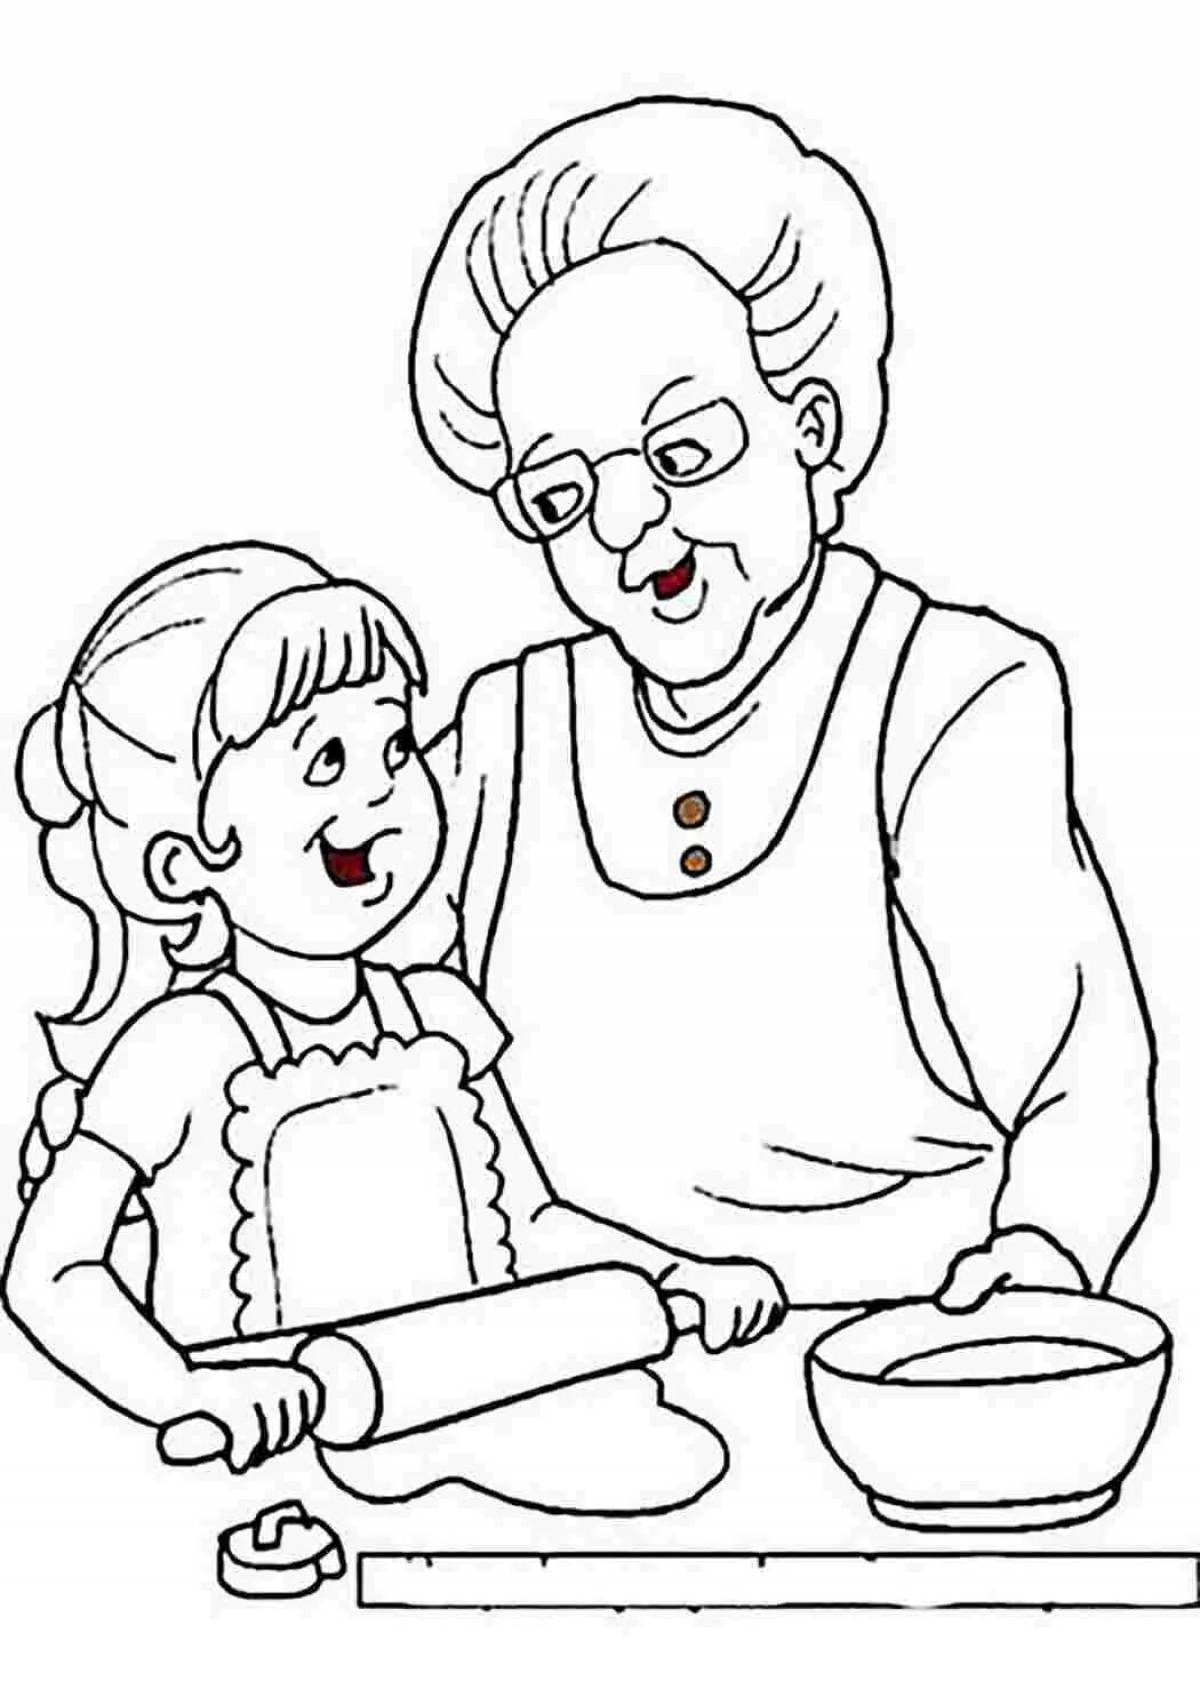 Great grandmother portrait coloring page